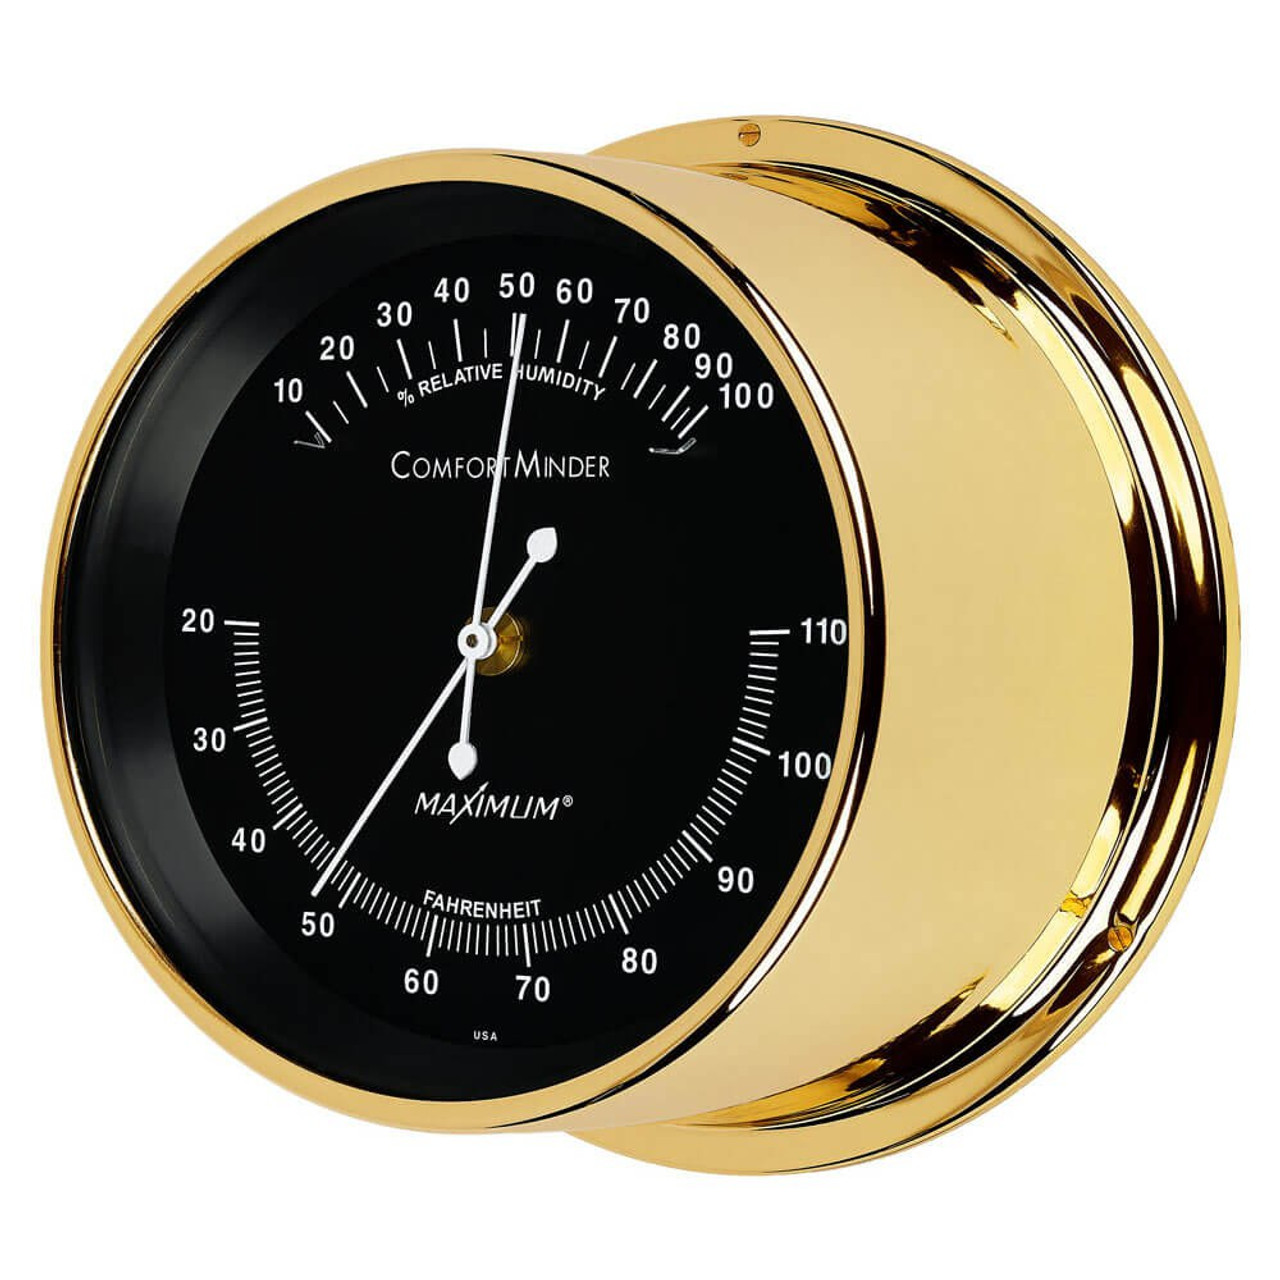 Comfortminder Humidity and Thermometer Comfort Reading Instrument - Polished Brass Case - Black Face